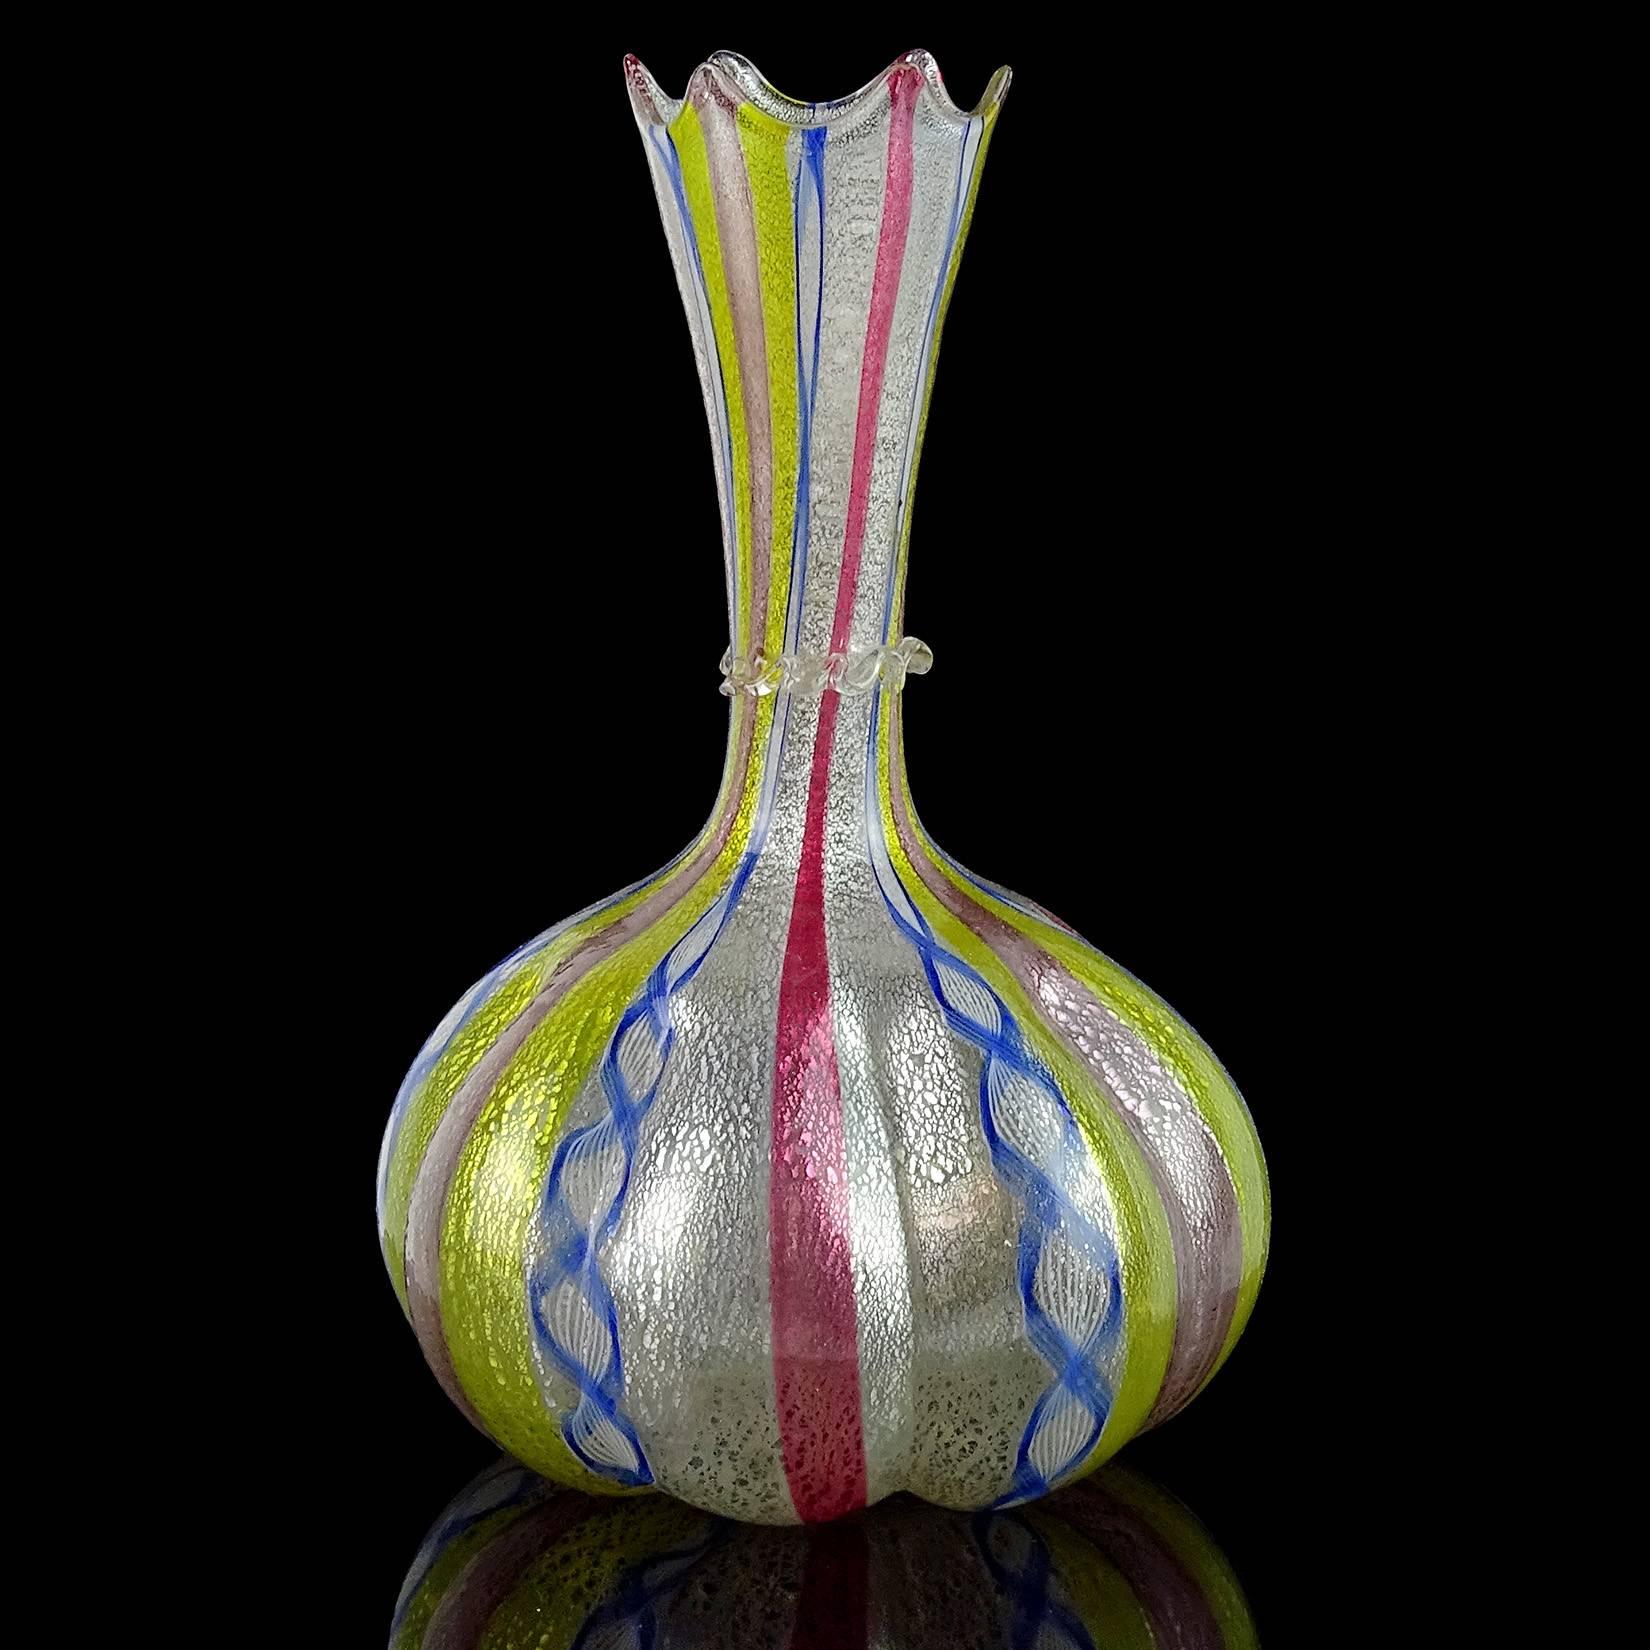 Rare antique Venetian handblown, silver leaf with color ribbon canes Italian art glass flower vase with crown rim. Documented to Salviati dott. Antonio / Artisti Barovier, circa 1877-1890. Three similar pieces are published in the book